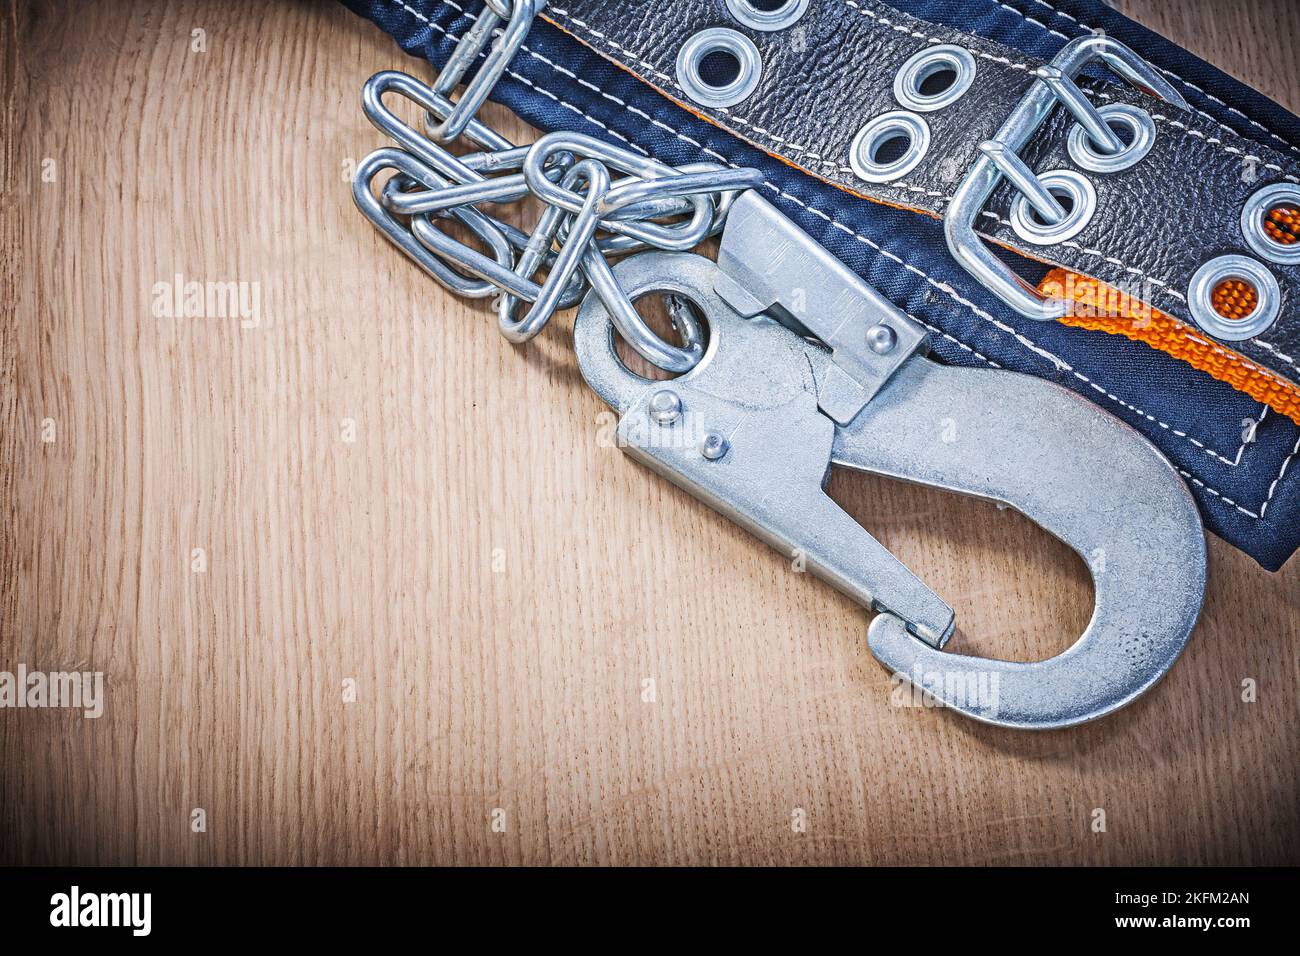 Construction body belt with metal carabiners chain on wooden board. Stock Photo